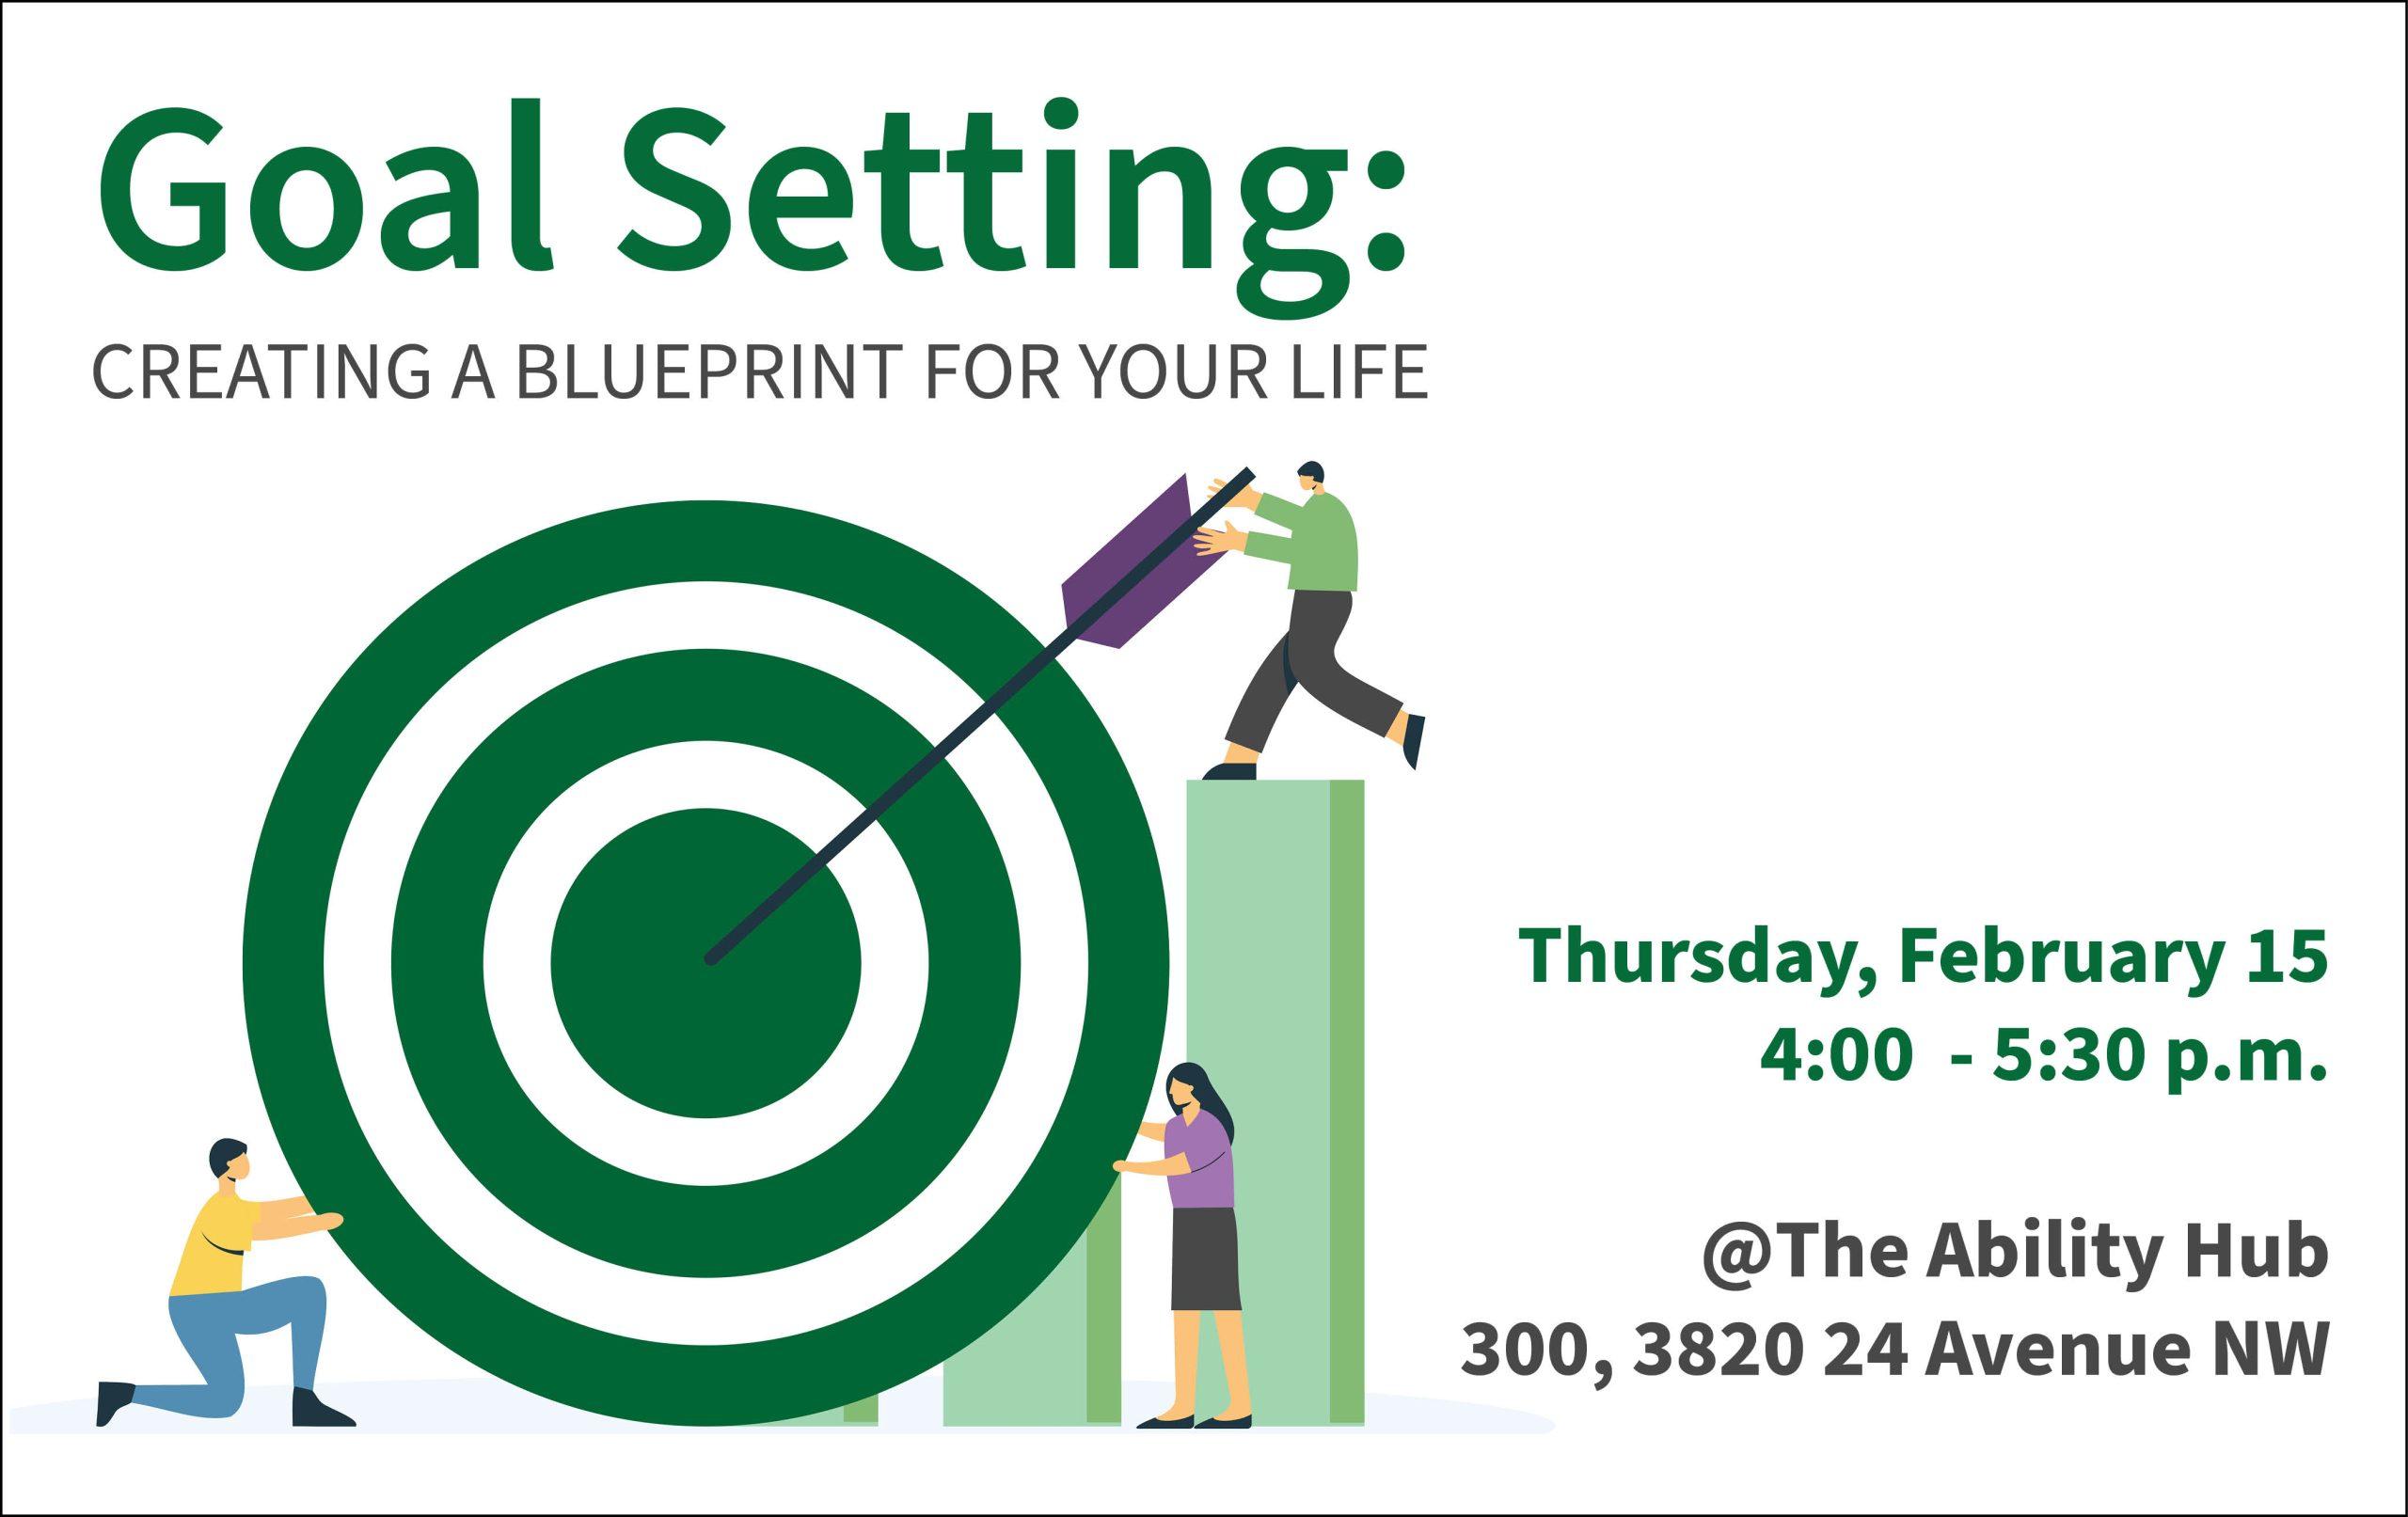 There is a large bullseye target with an arrow in the centre. Around the bullseye are three people who are working on setting it up, working together to achieve their goal.